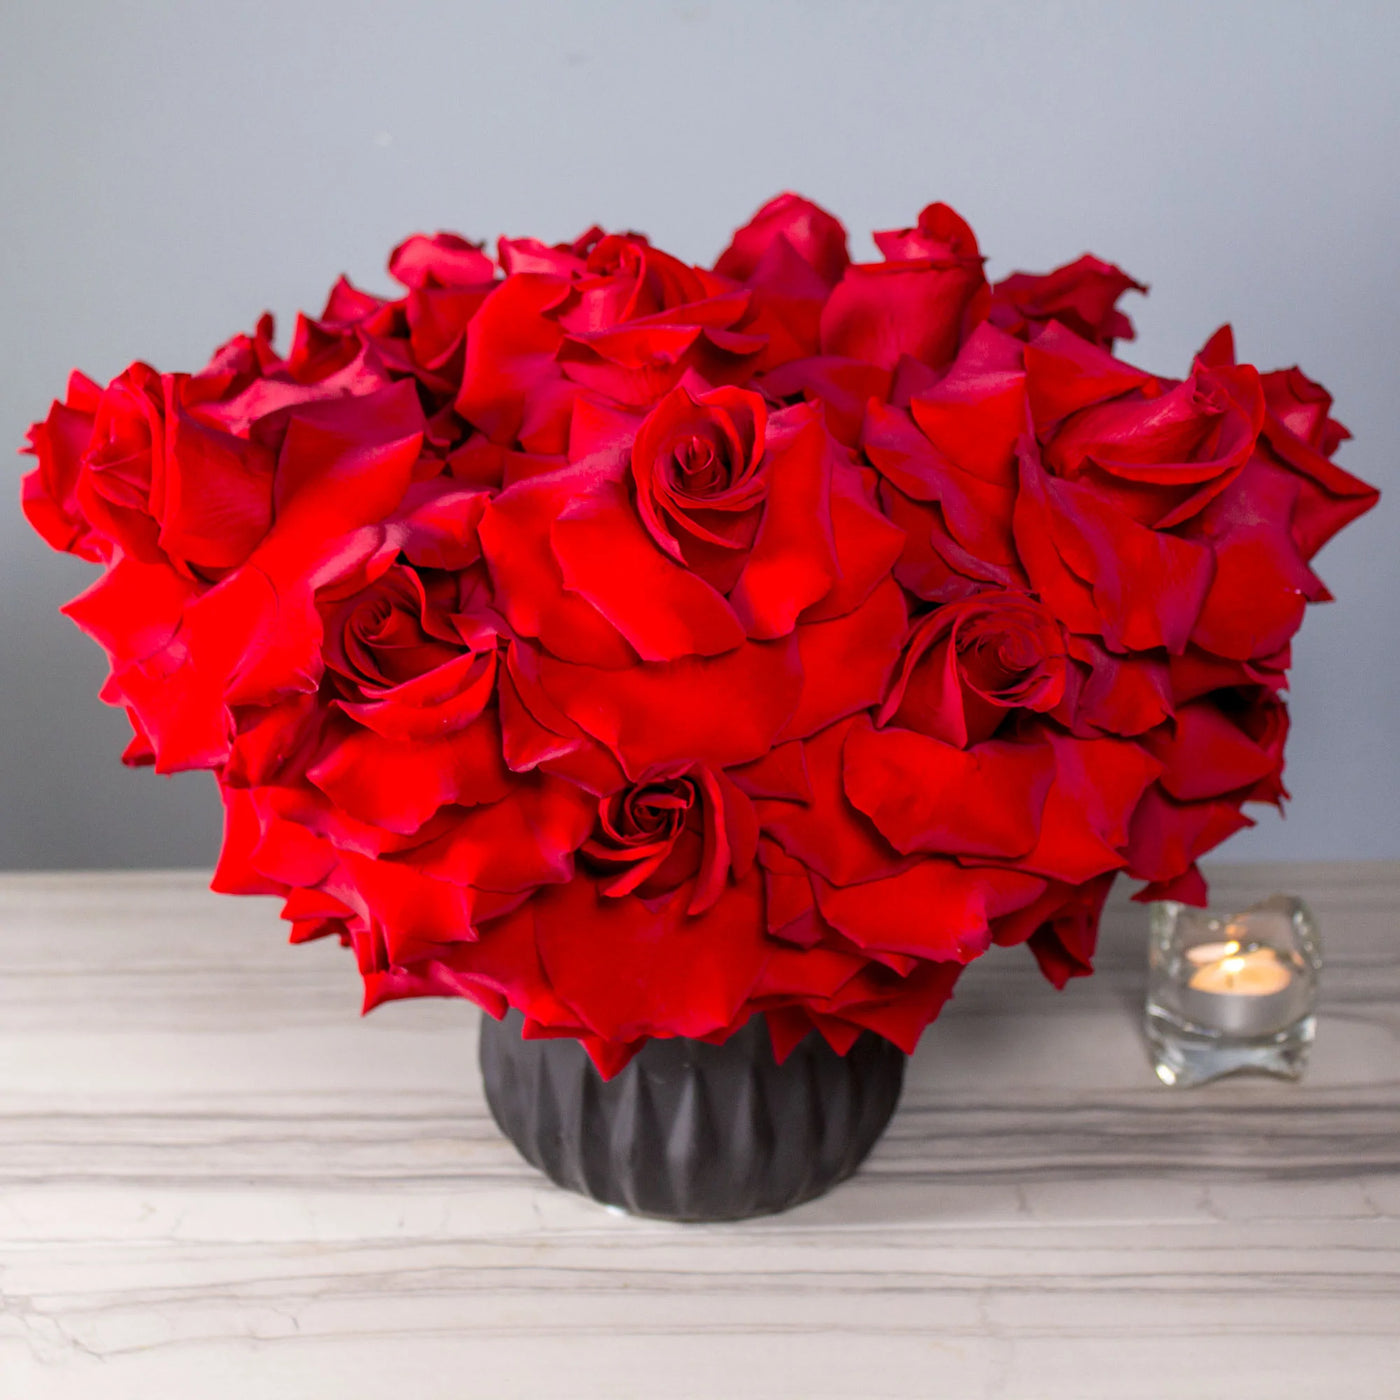 My Beverly Hills Florist presnets same day delivery for our American Beauty!